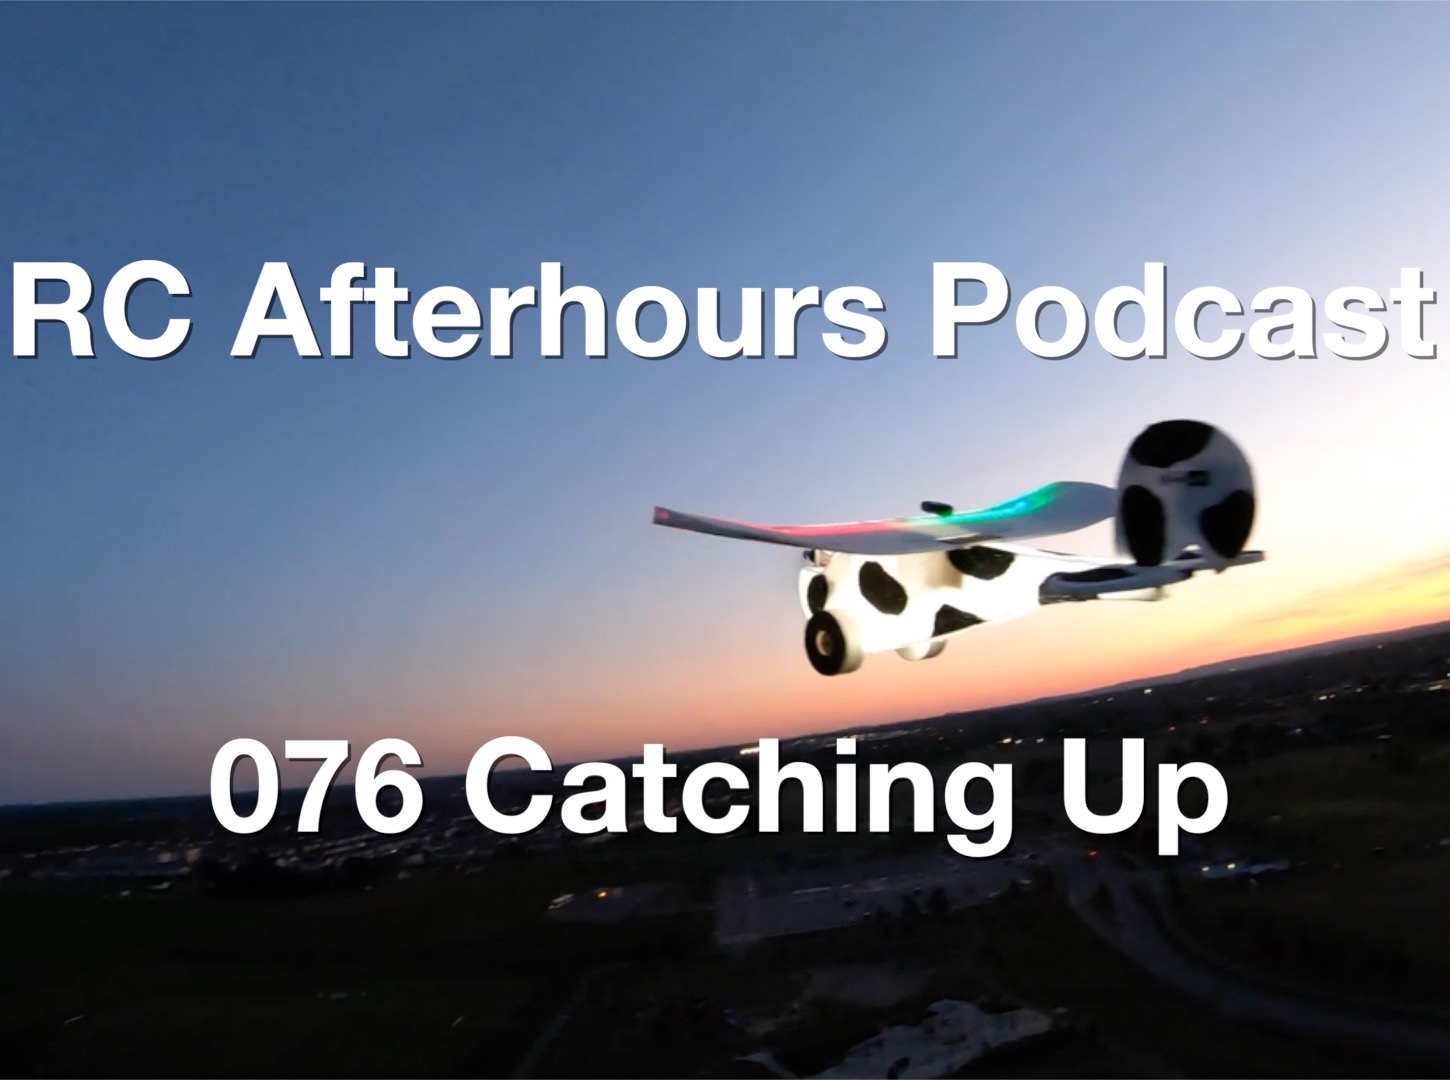 RC Afterhours Podcast 76 - Catching Up